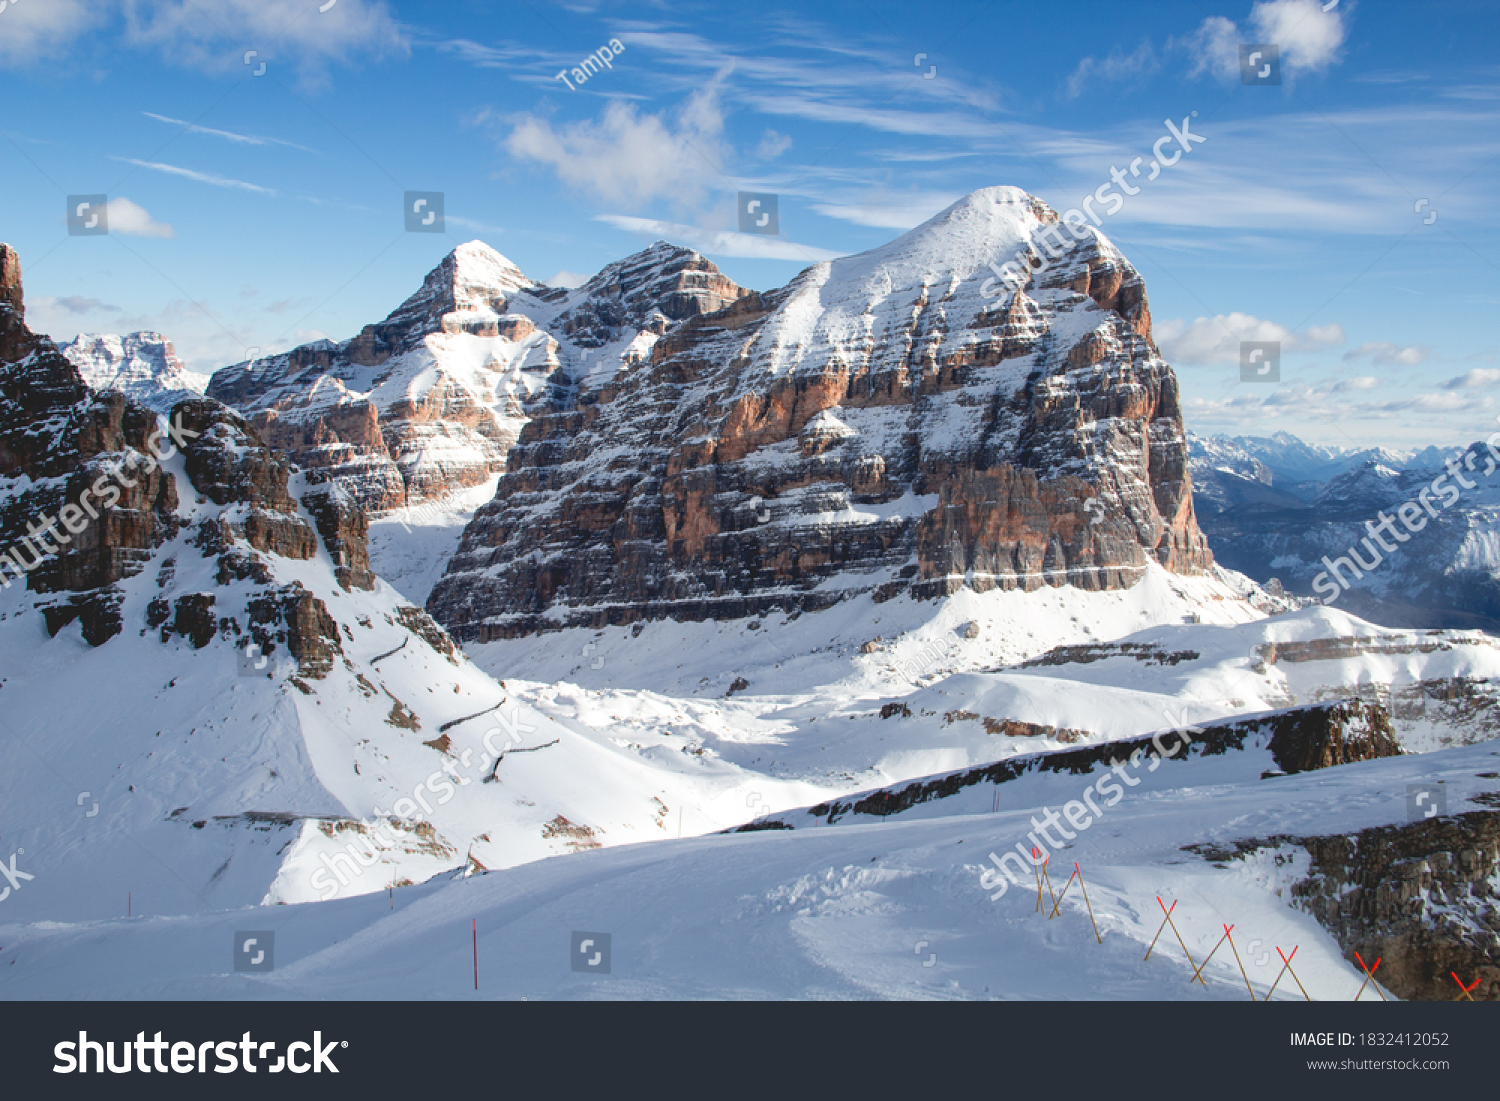 Tofana di Rozes, Dolomites, South Tirol, view from Lagazuoi cable car #1832412052